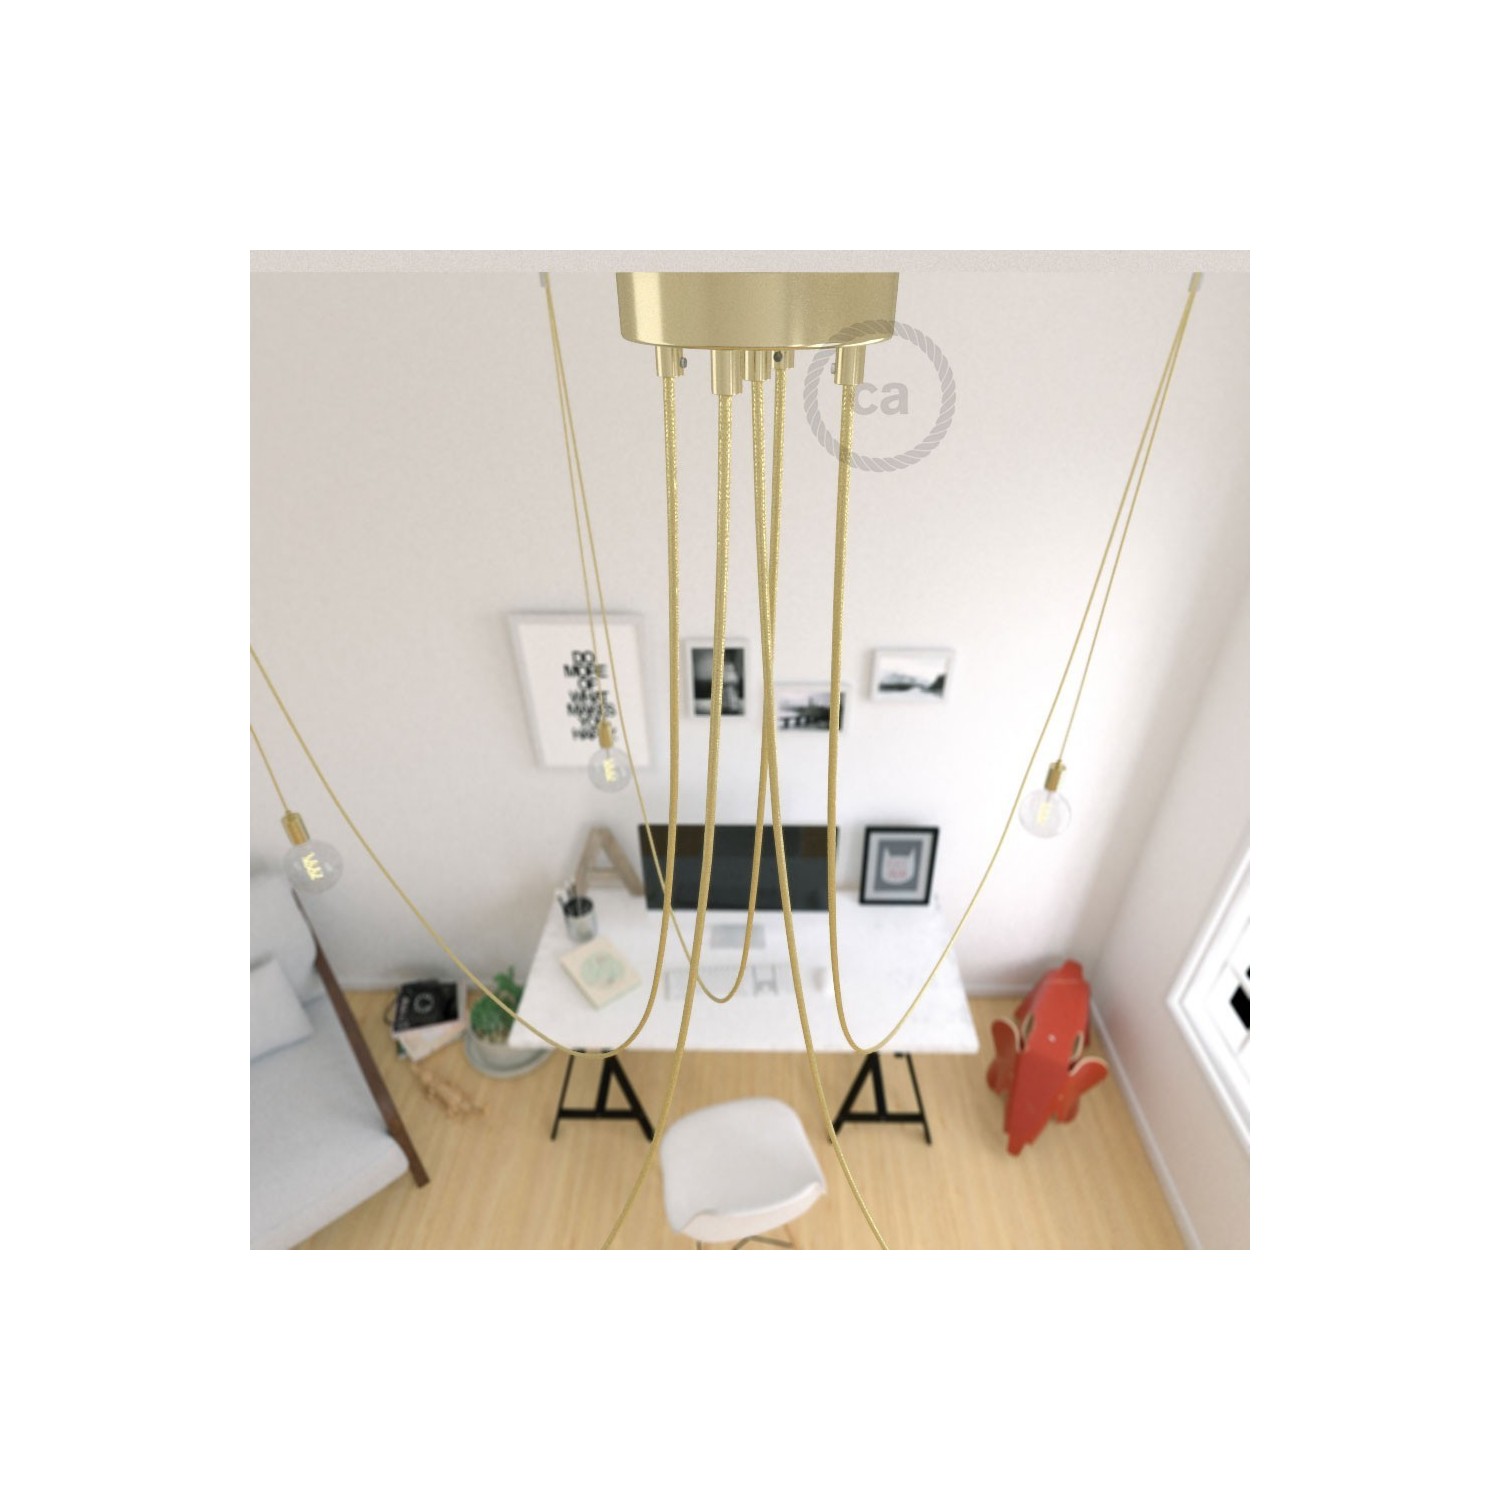 Spider, multiple suspension with 5 pendants, brass metal, RR13 Brass coloured Copper cable, Made in Italy.